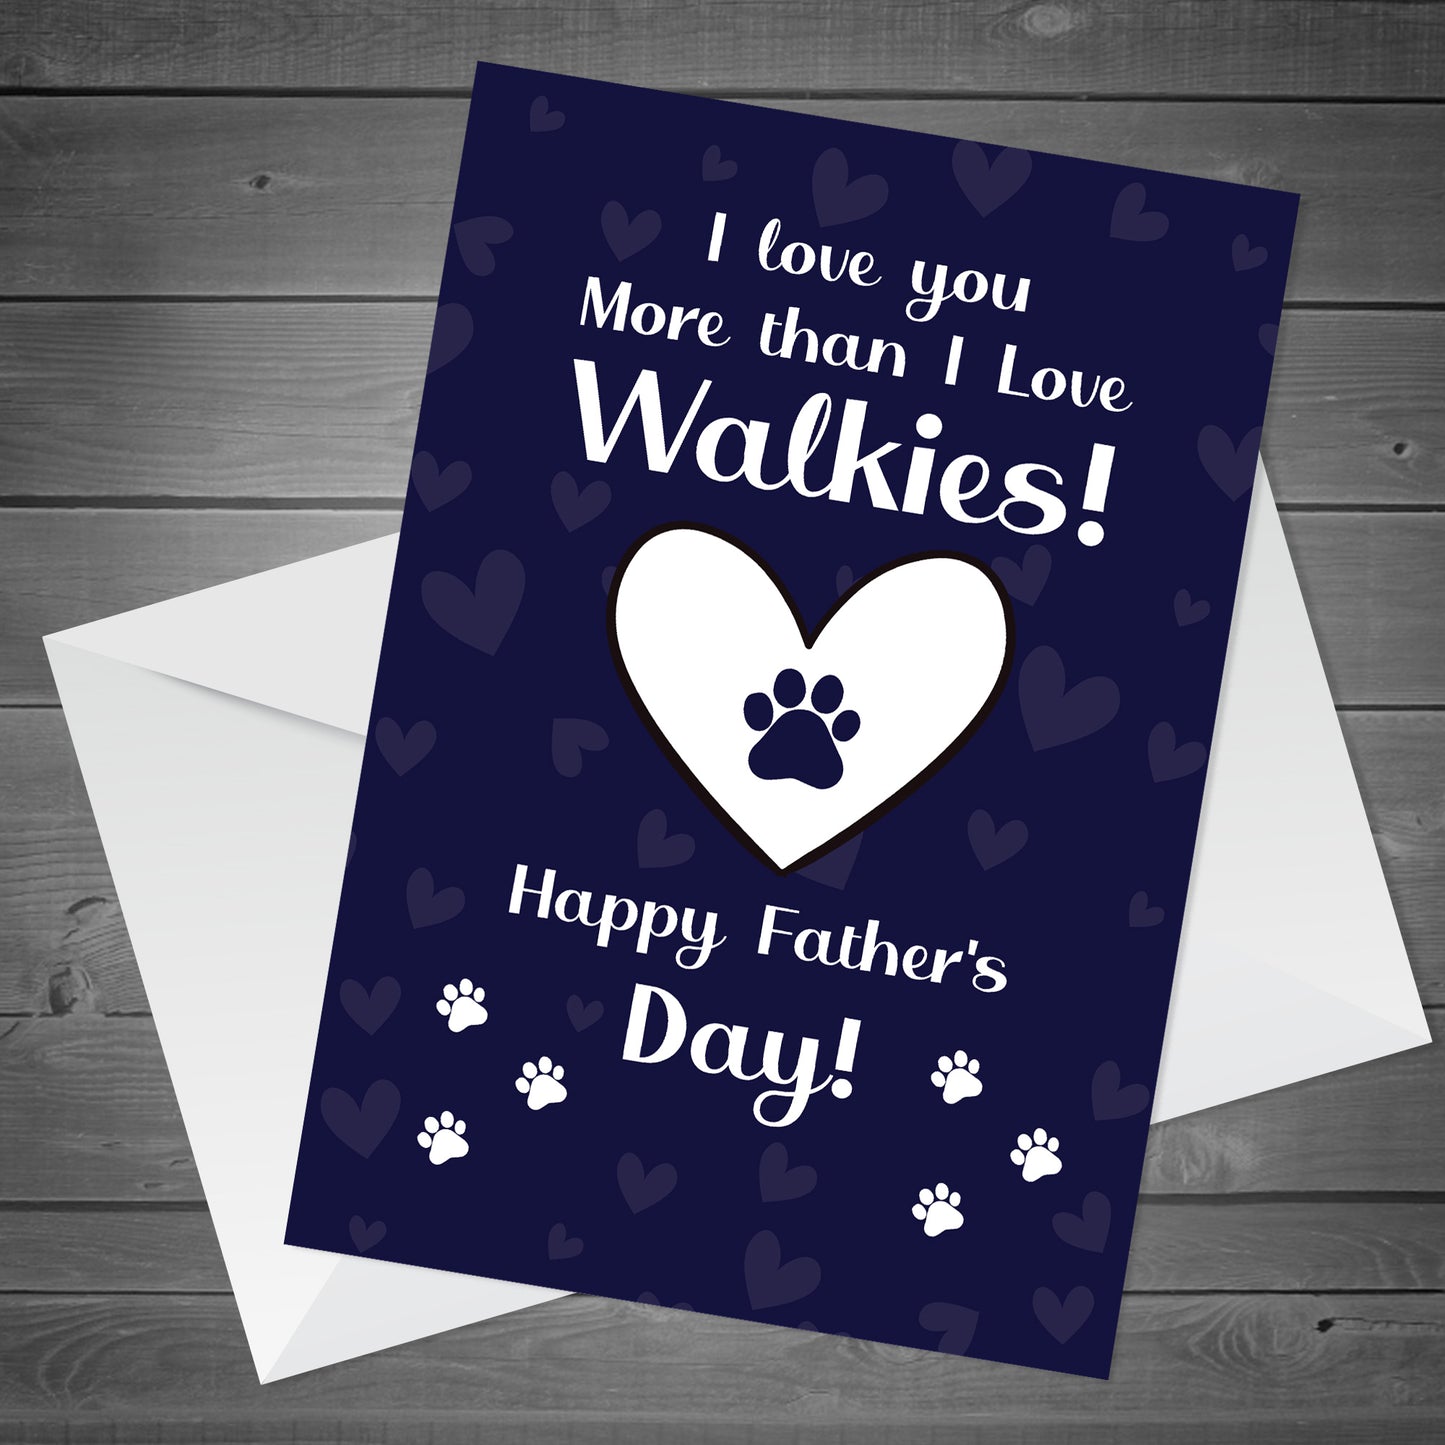 Funny Happy Fathers Day Card From The Dog For Dad Pet Design